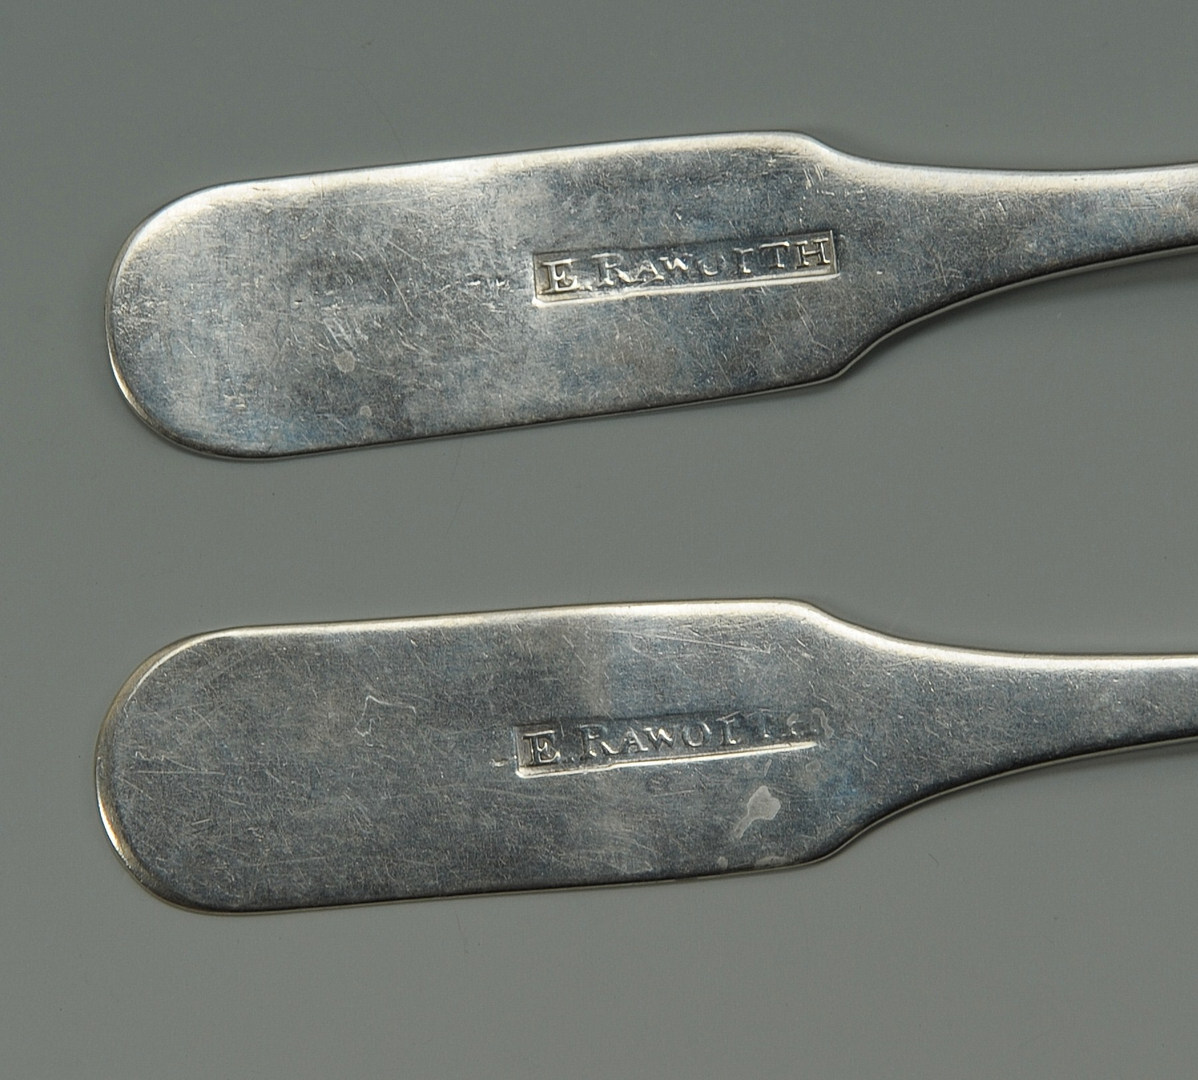 Lot 42: Two Nashville coin silver spoons, E. Raworth